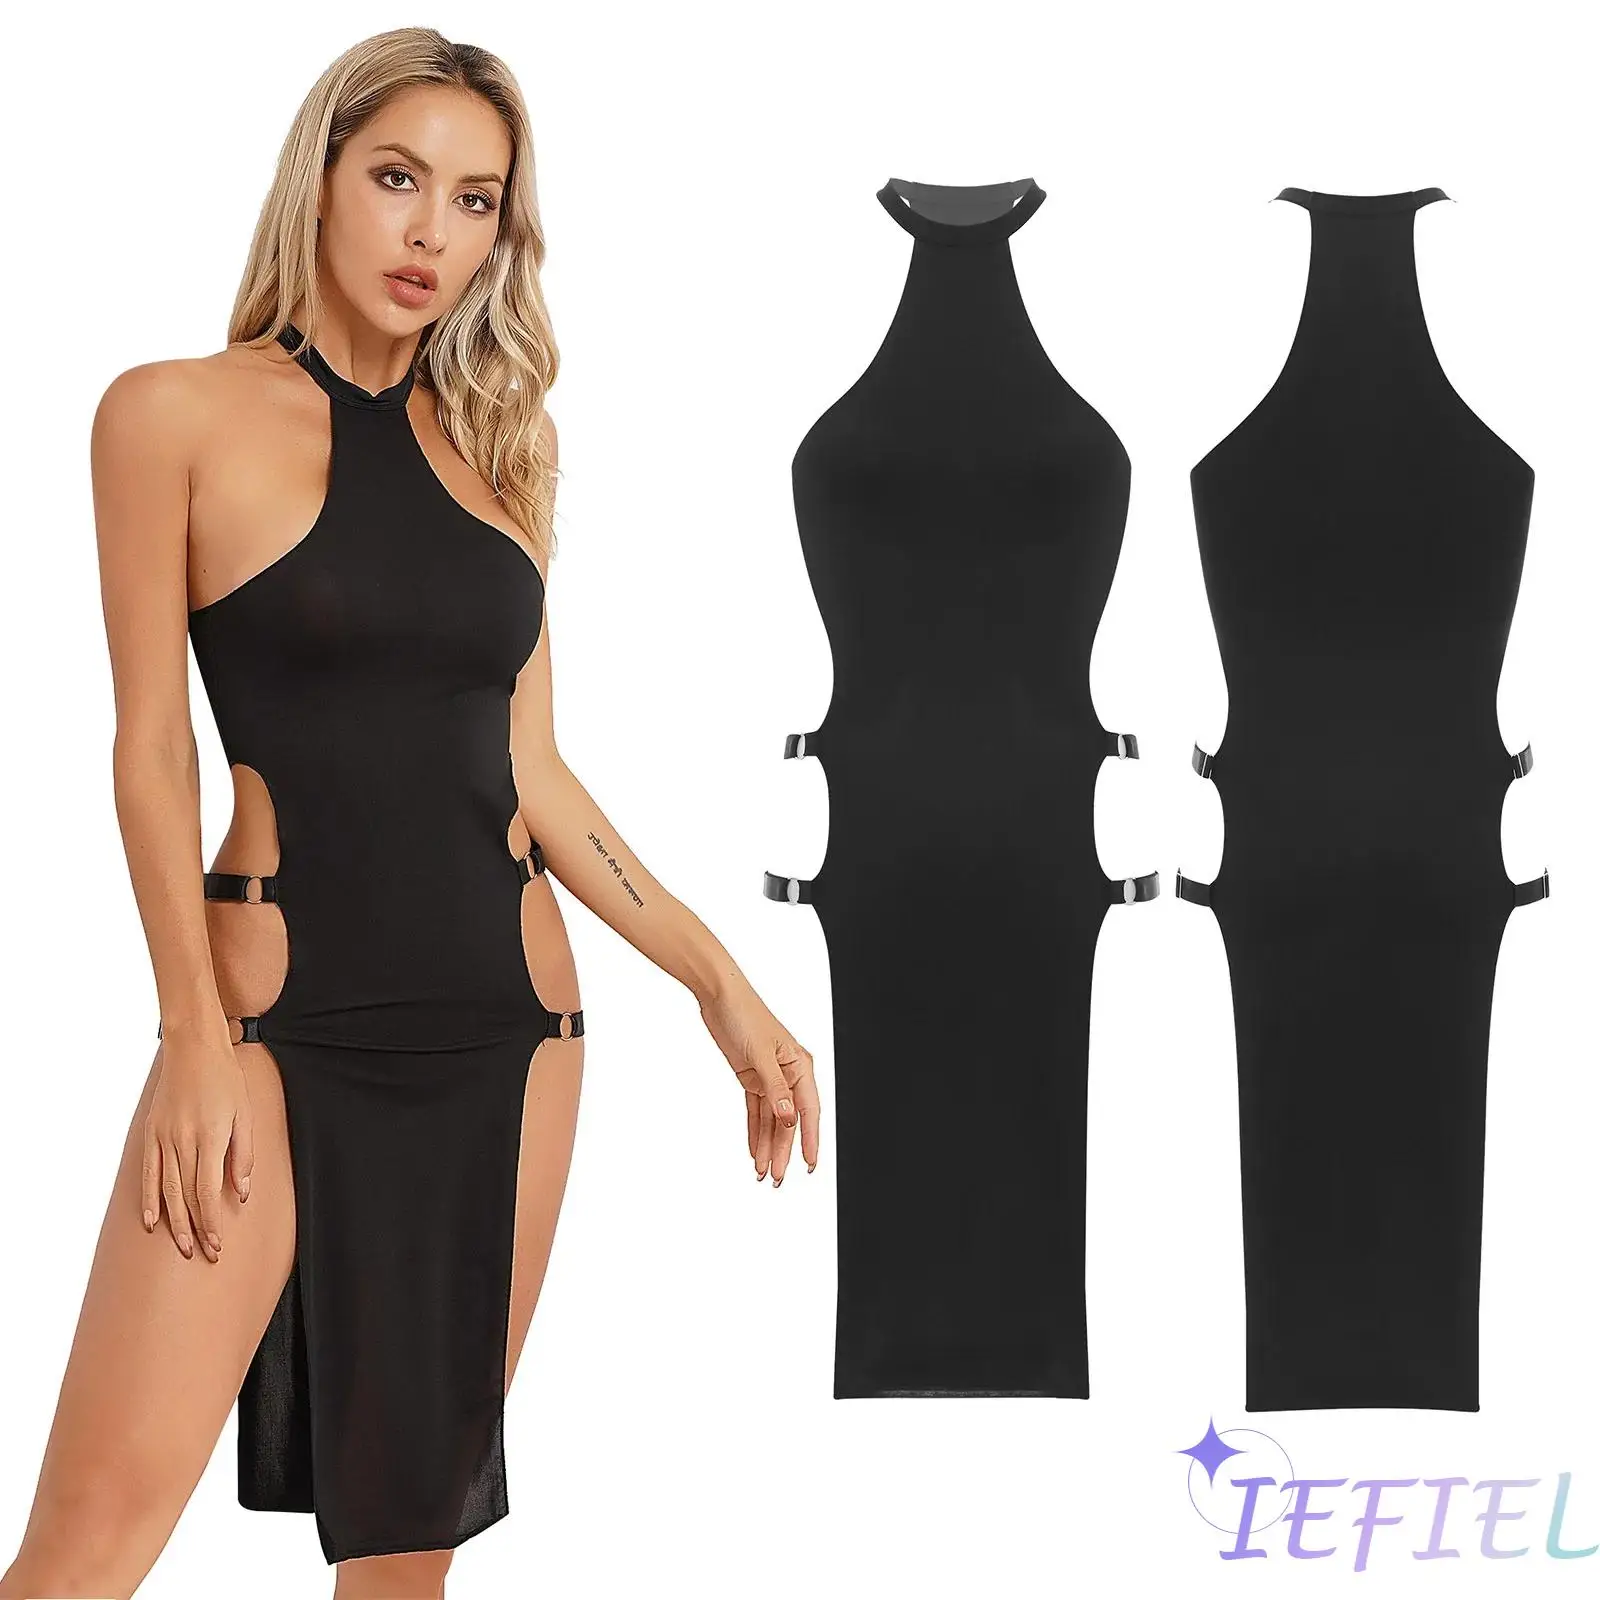 

Women Sleeveless Strappy Hollow Out Sides Split Bodycon Dress Rave Disco Pole Dancing Show Sexy Clubwear Cosplay Party Costume